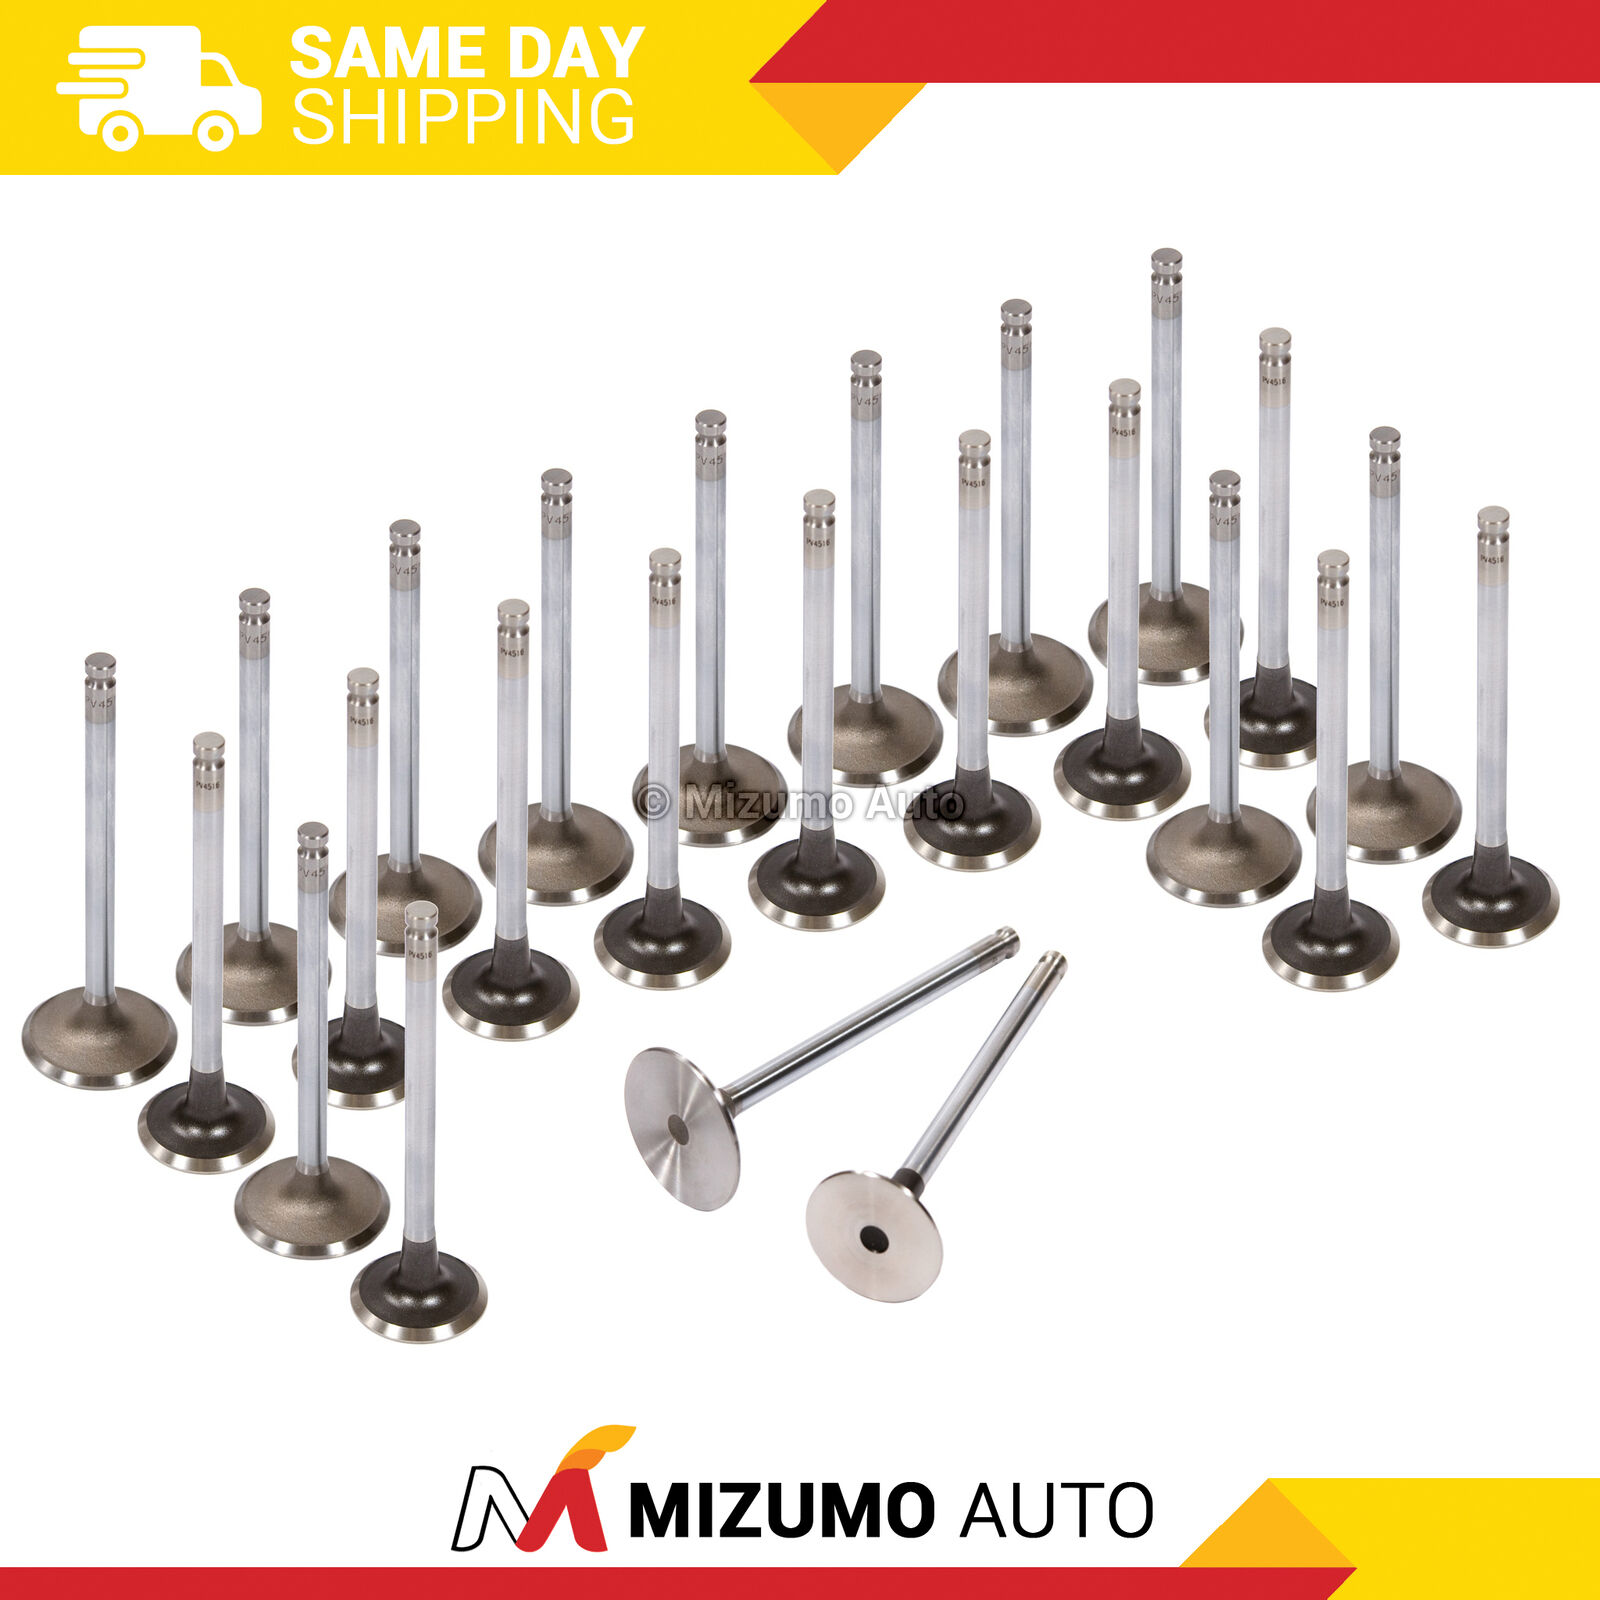 Intake Exhaust Valves Fit 93-02 Ford Proble Mazda 626 MX6 2.5 DOHC KL